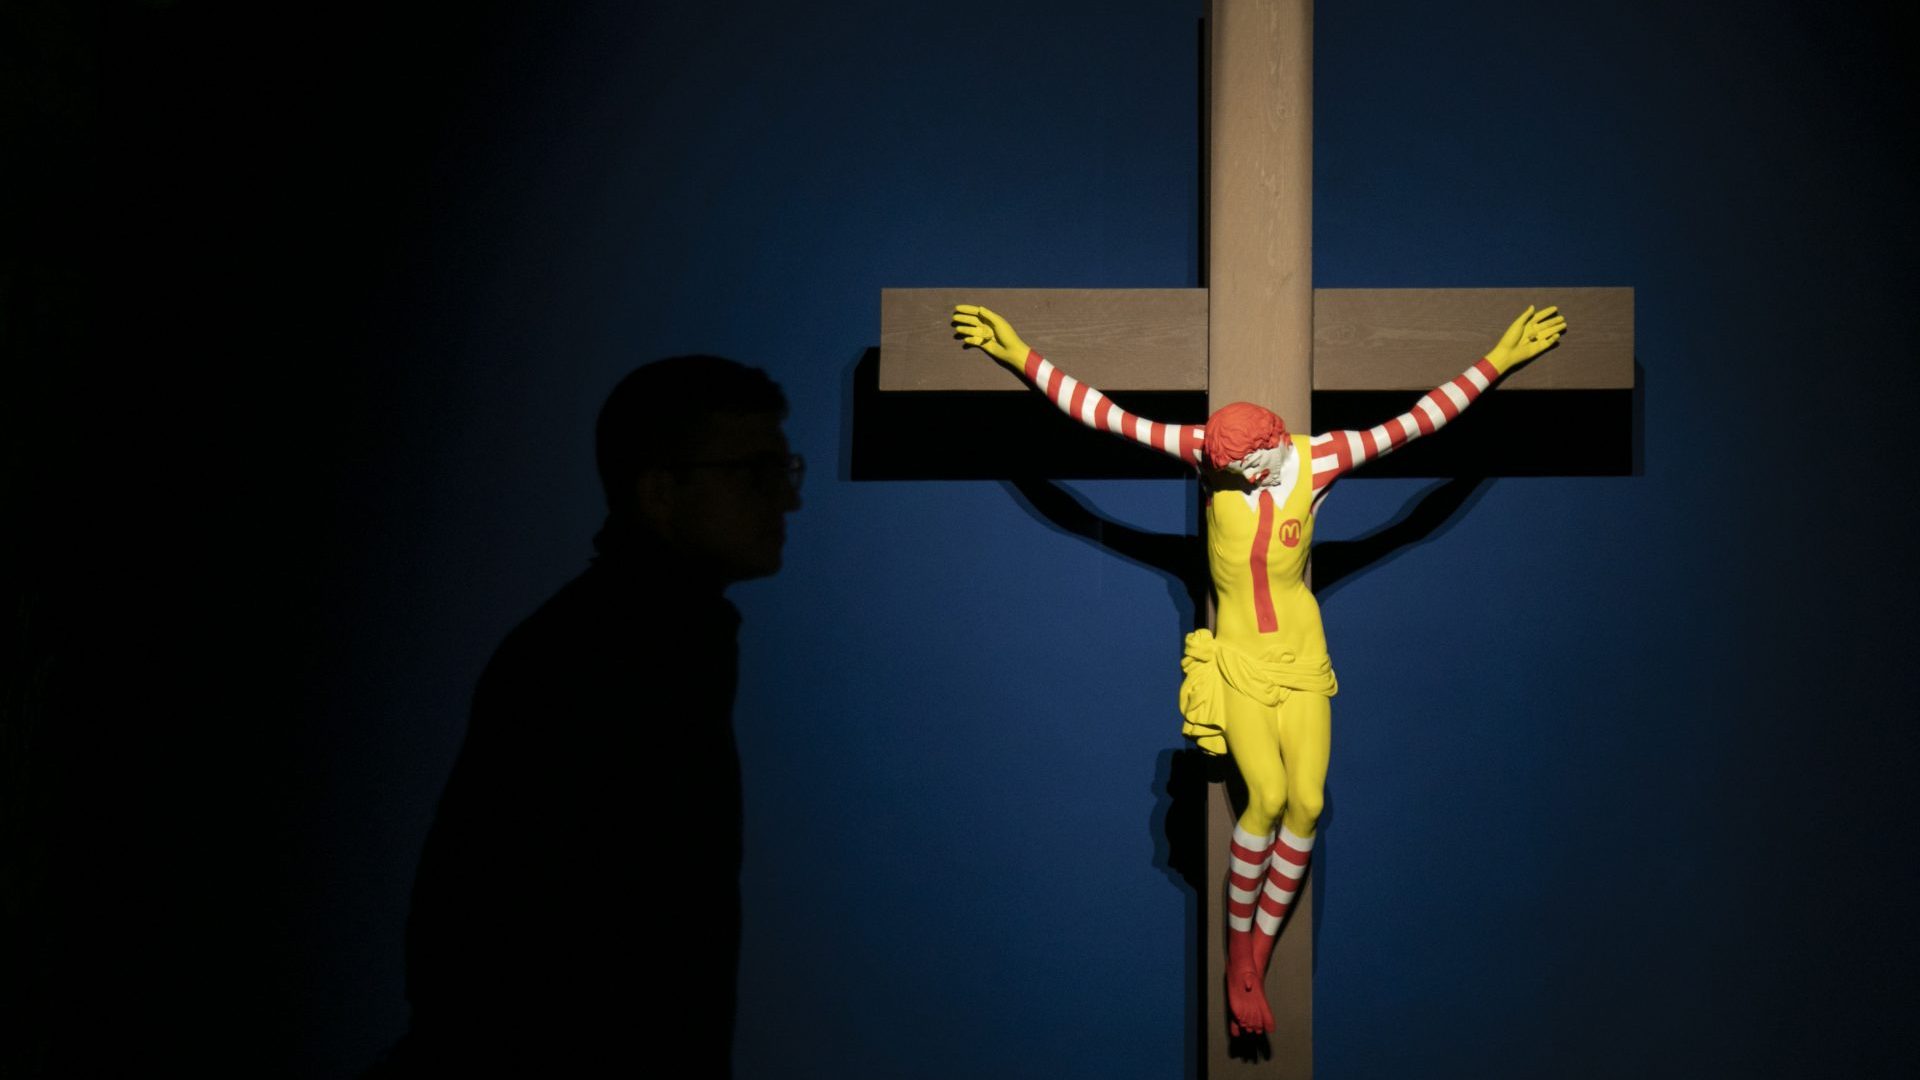 A visitor observes the work called 'McJesus' , by the artist Jani Leinonen, at the Forbidden Art Museum. Photo: Manuel Medir/Getty Images